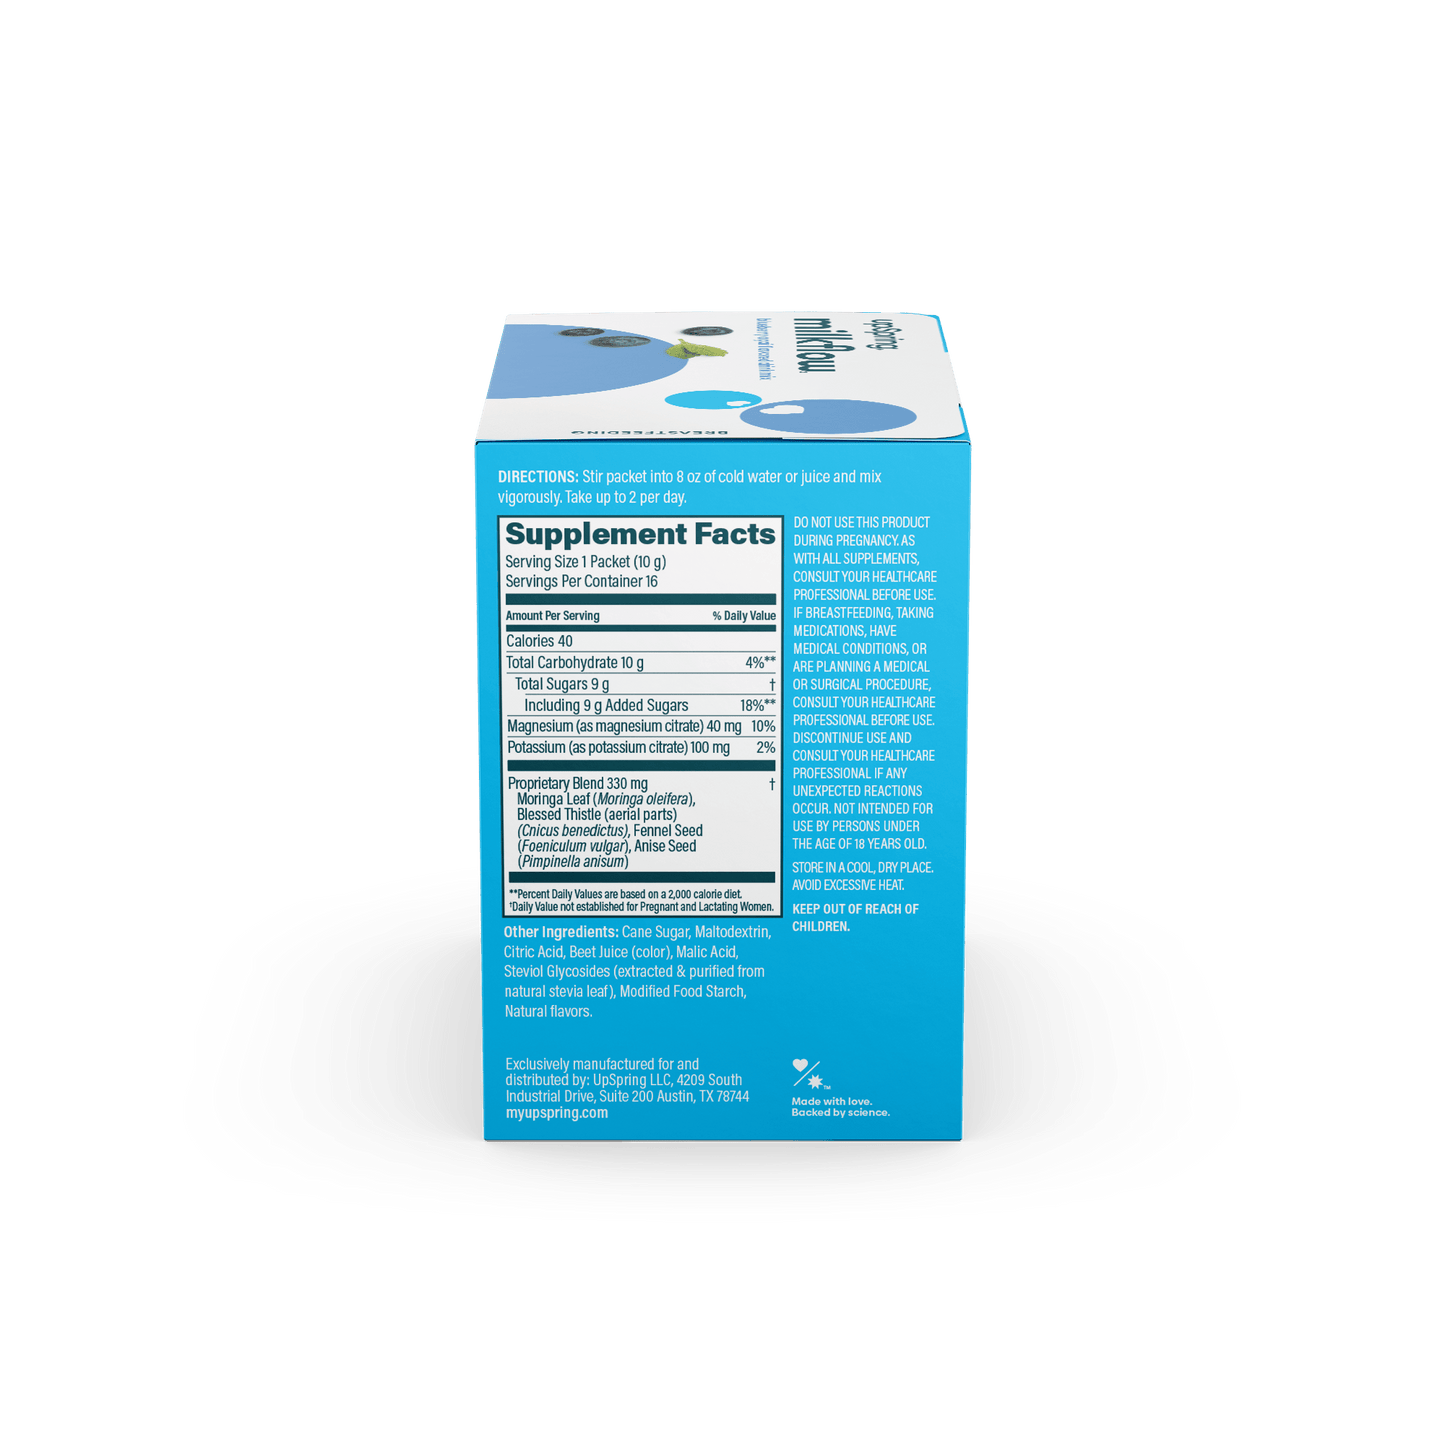 Supplement facts and warnings panel on the side of the MilkFlow box